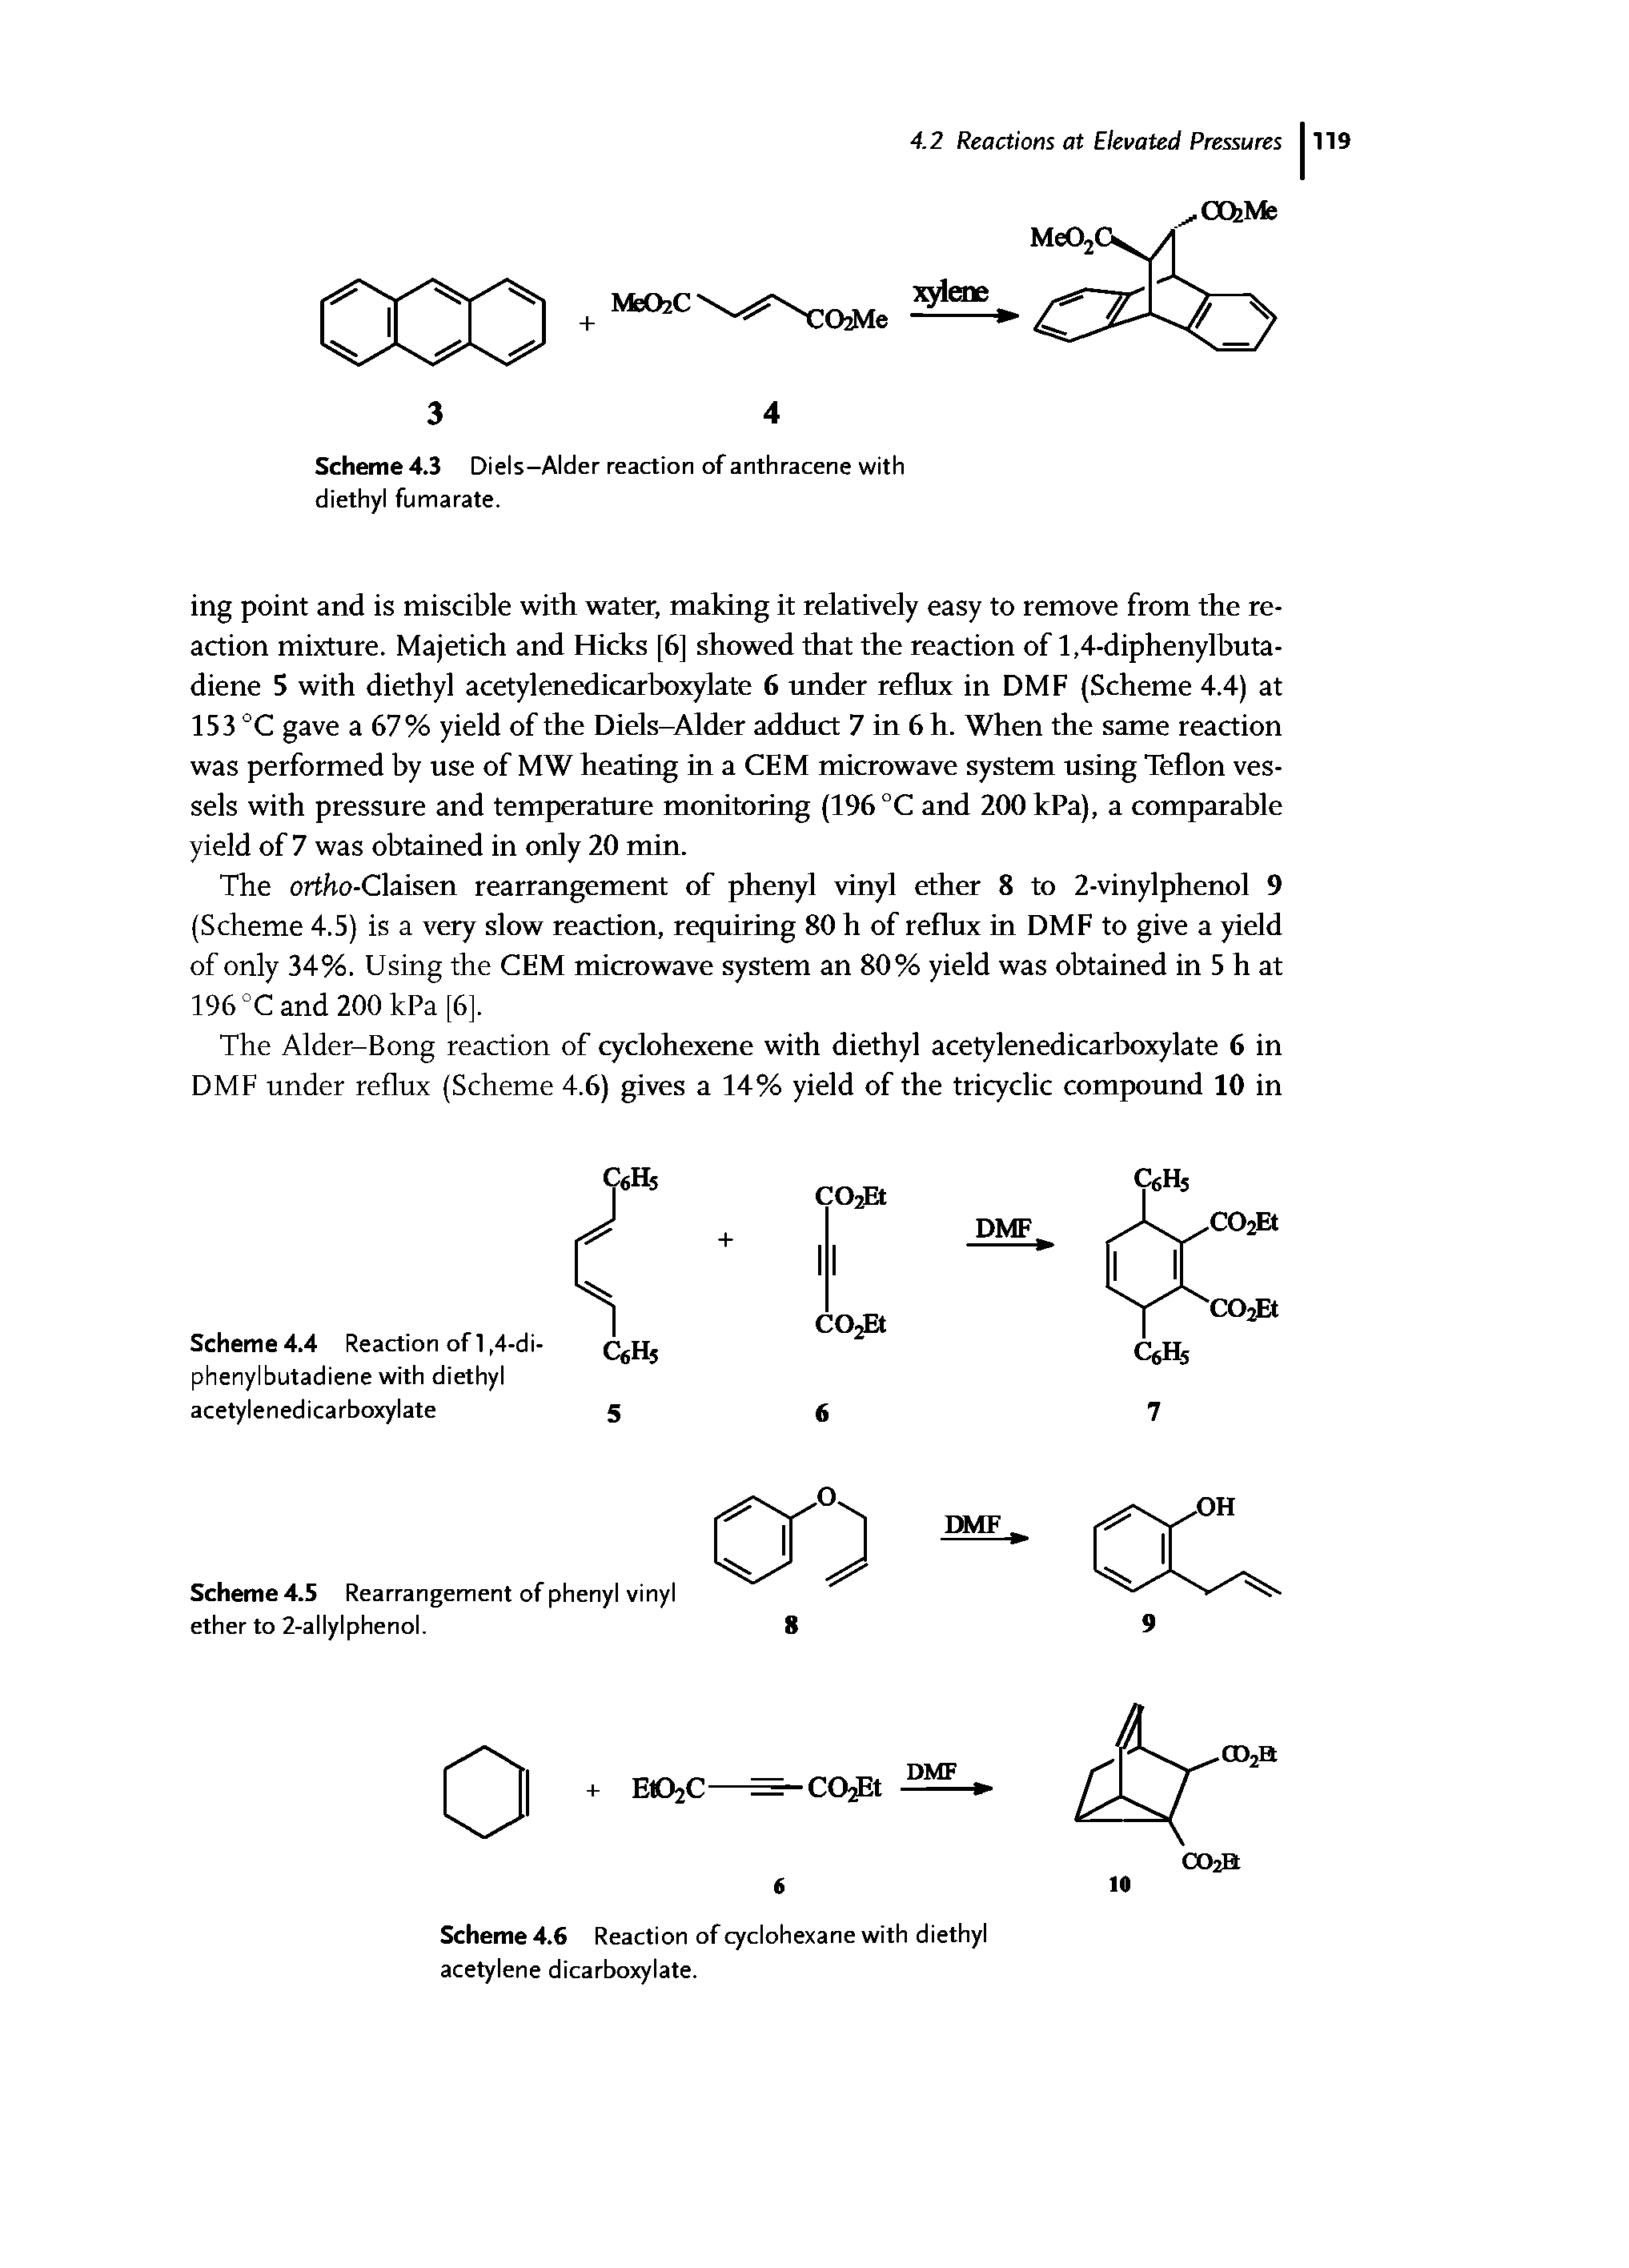 Scheme 4.4 Reaction of 1,4-di-phenylbutadiene with diethyl acetylenedicarboxylate...